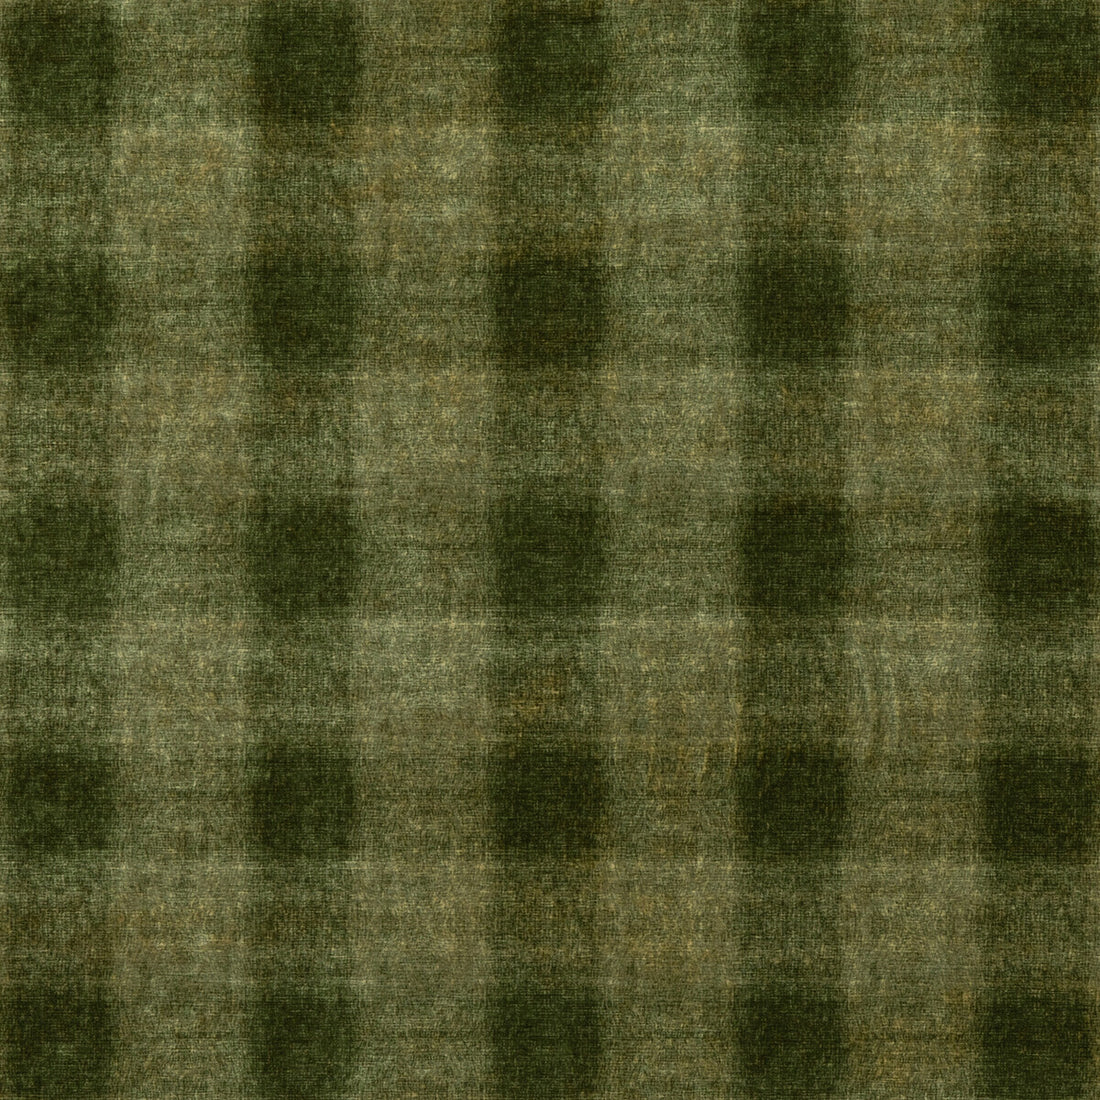 Highland Check fabric in emerald color - pattern FD314.S16.0 - by Mulberry in the Modern Country Velvets collection